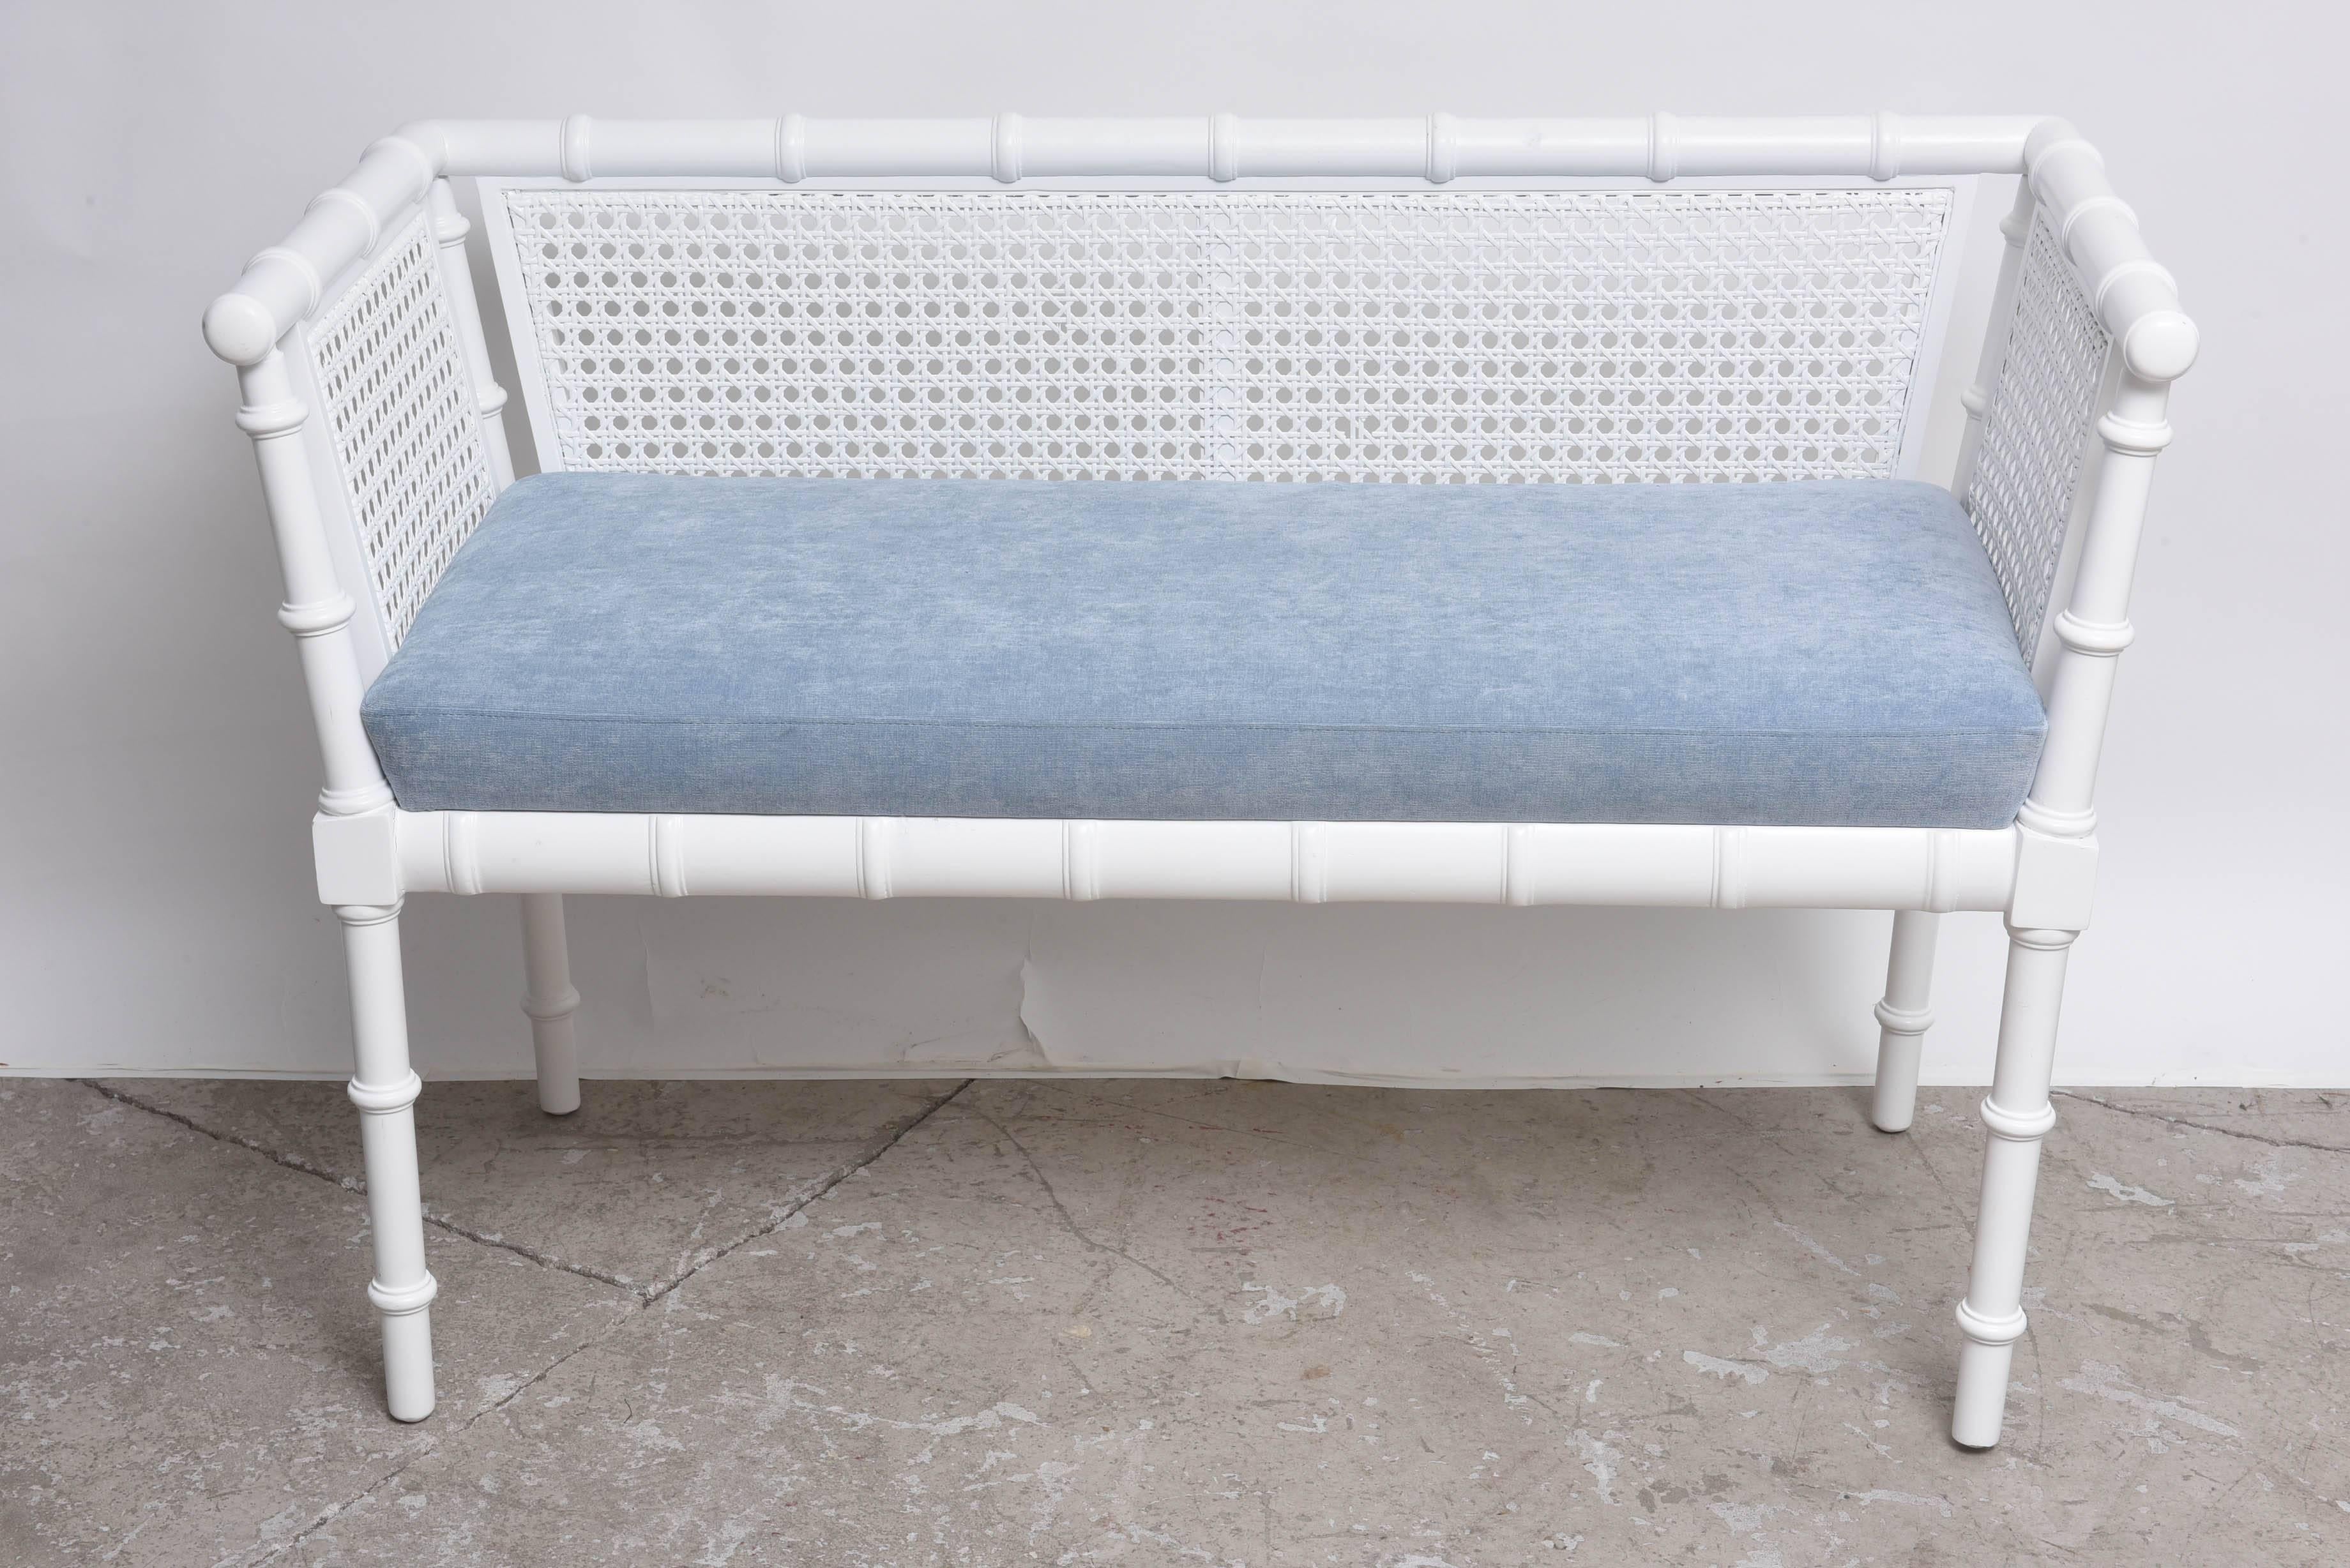 Upholstered foam on wood construction, frame done in a faux bamboo style.
Finished in a satin white paint. A great addition to modern, contemporary, or Classic interior.